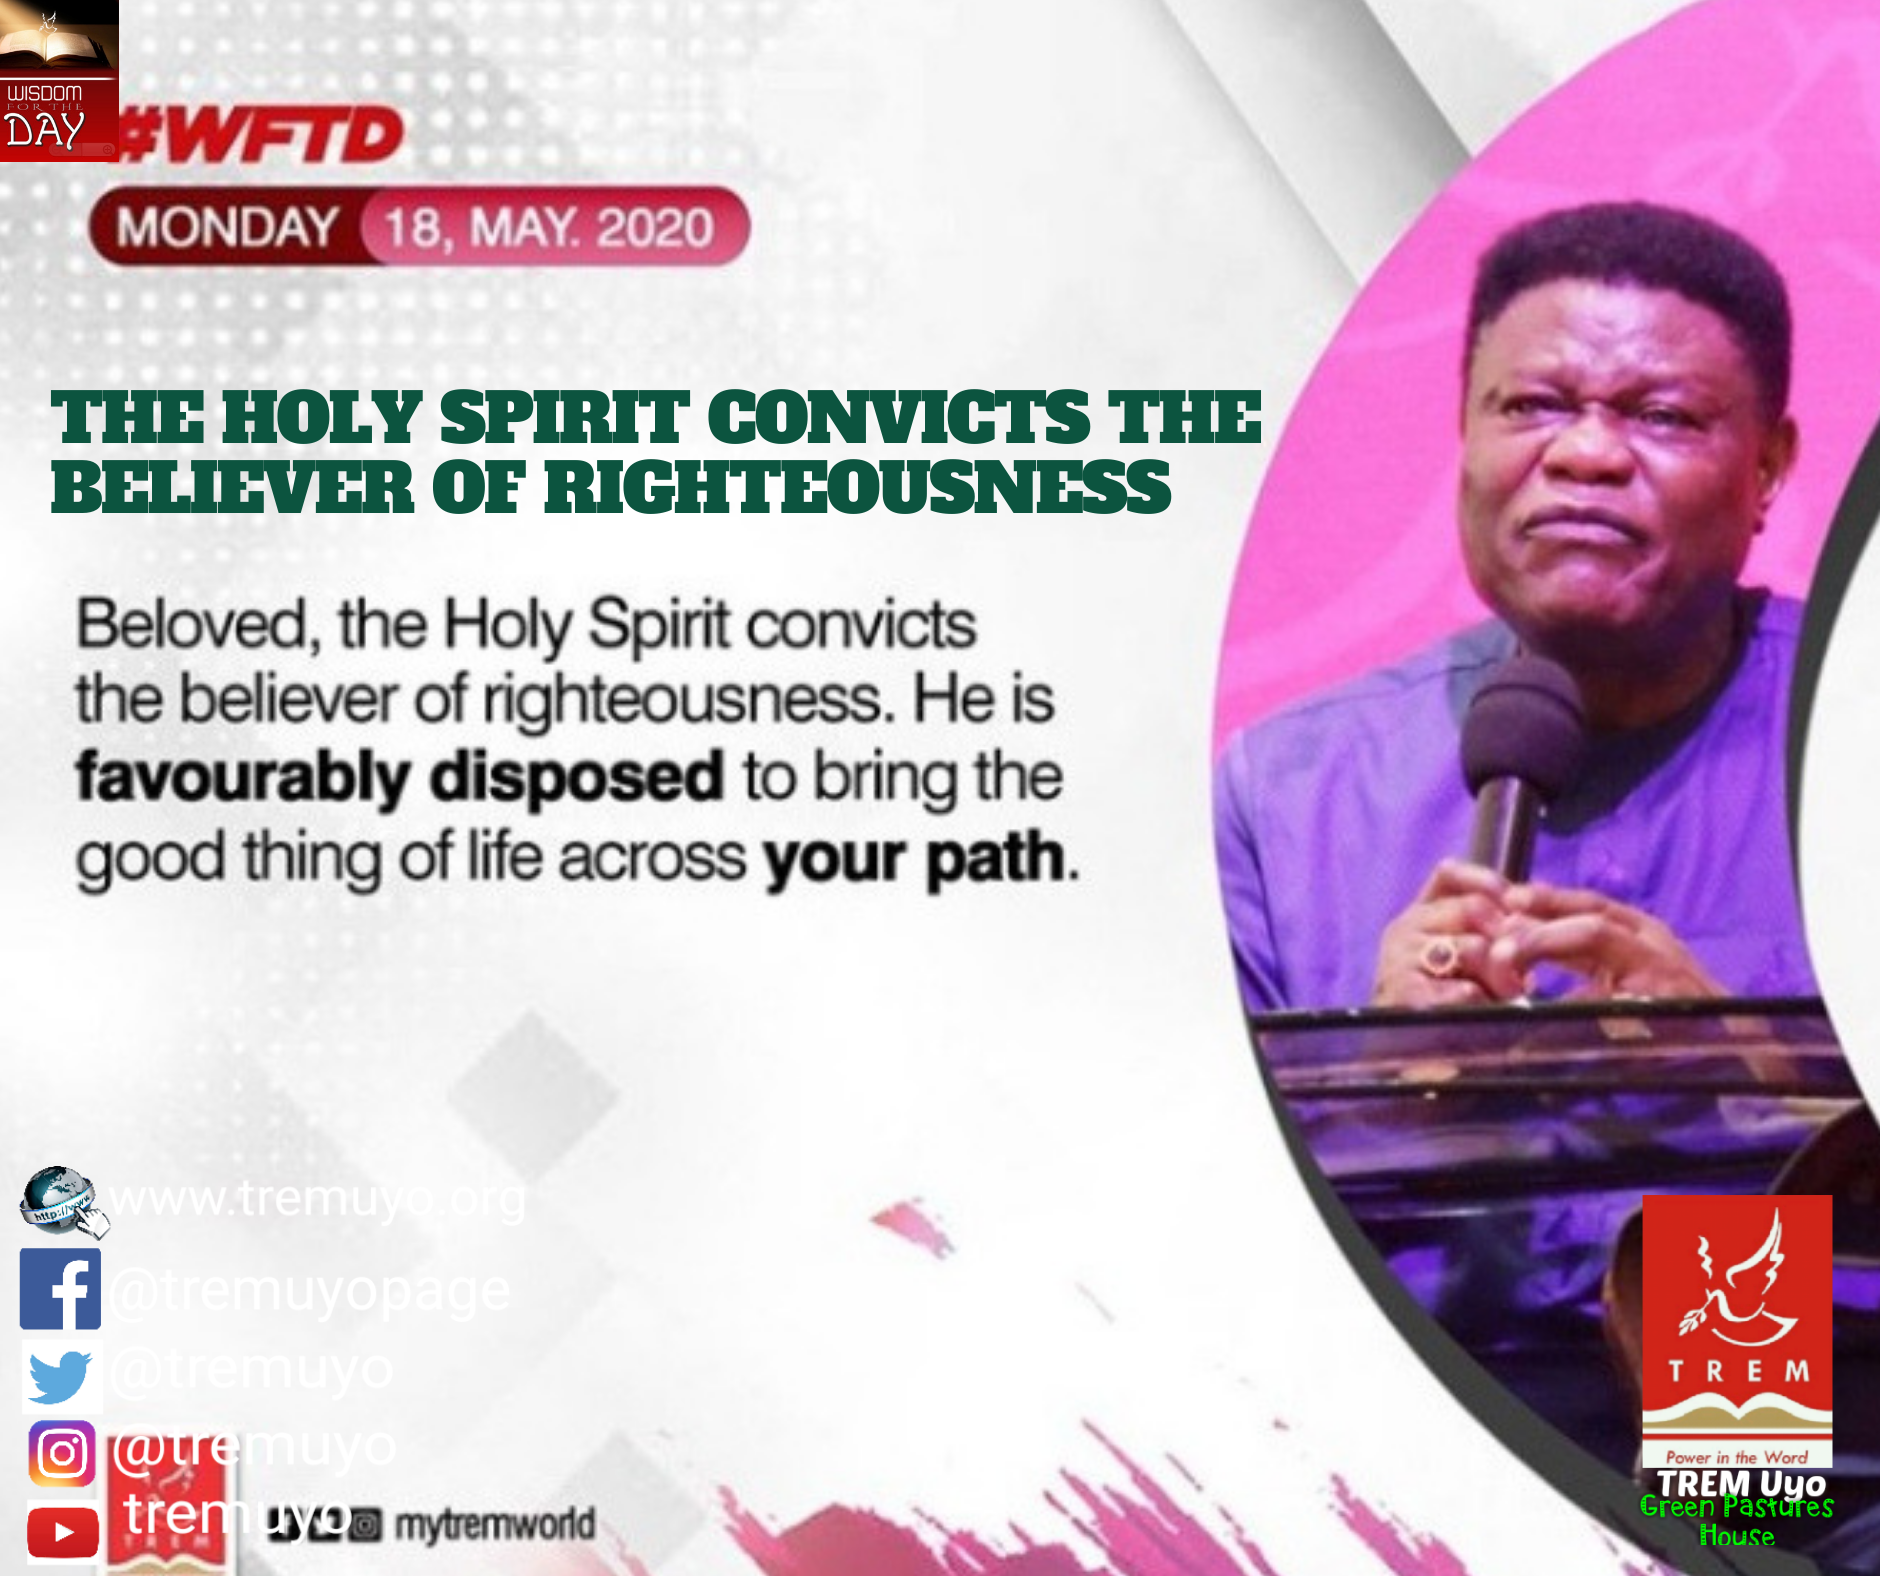 THE HOLY SPIRIT CONVICTS THE BELIEVER OF RIGHTEOUSNESS